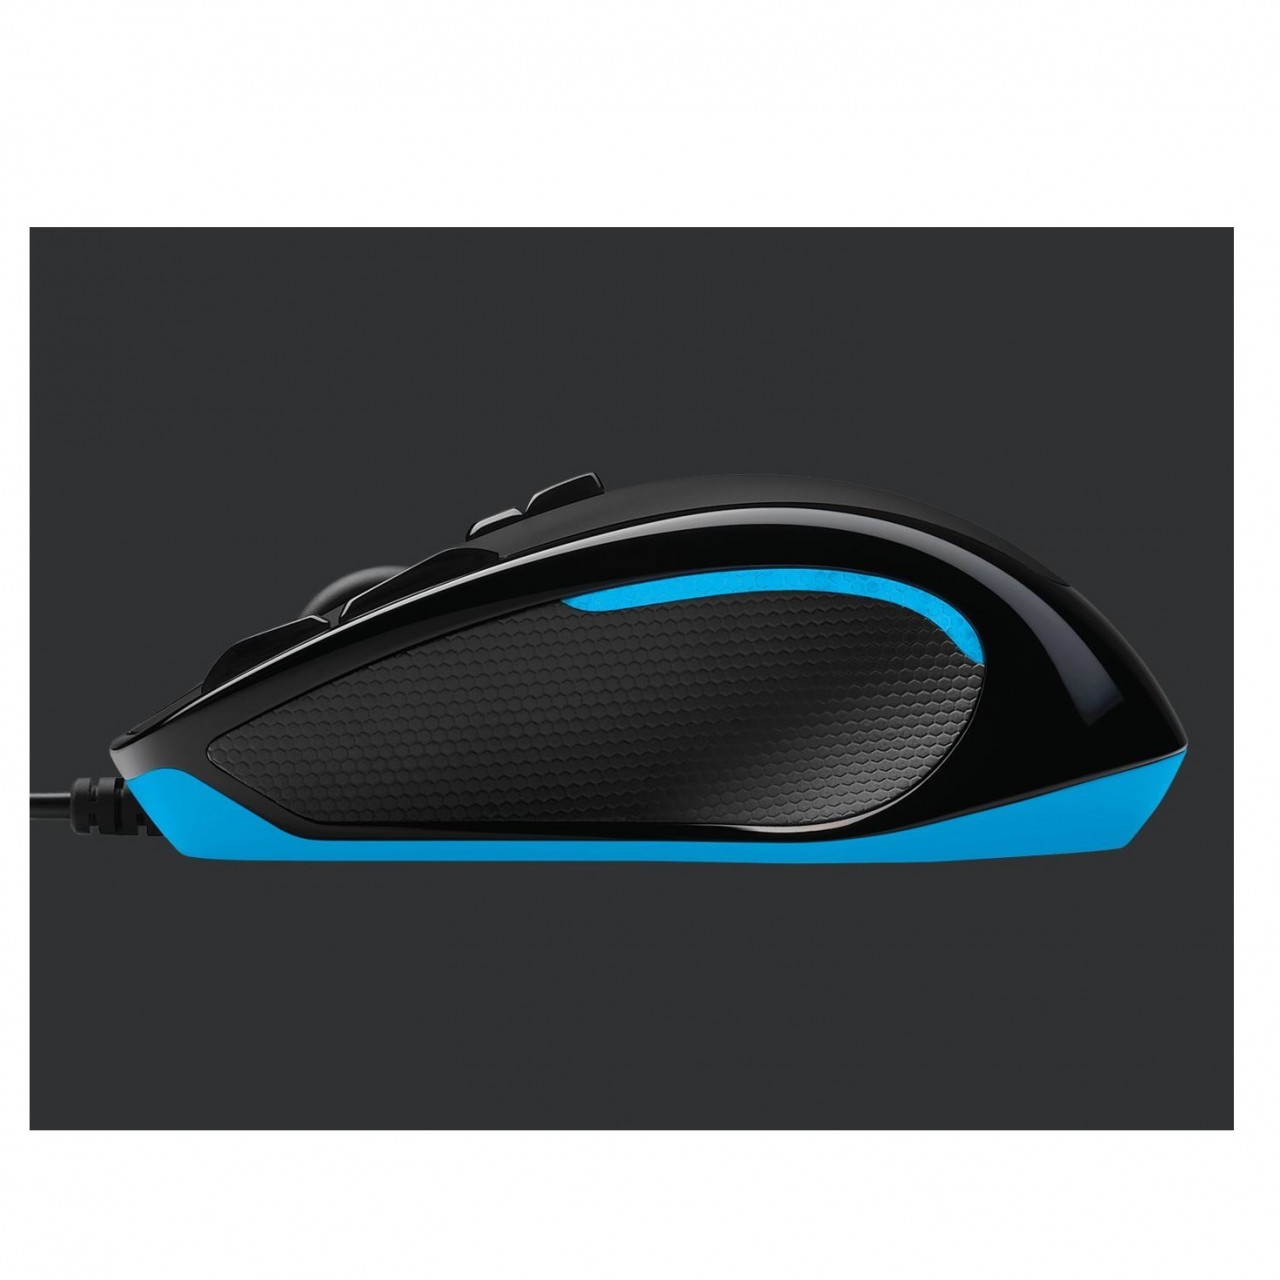 Logitech G300s Gaming Mouse With 9 Programmable Buttons